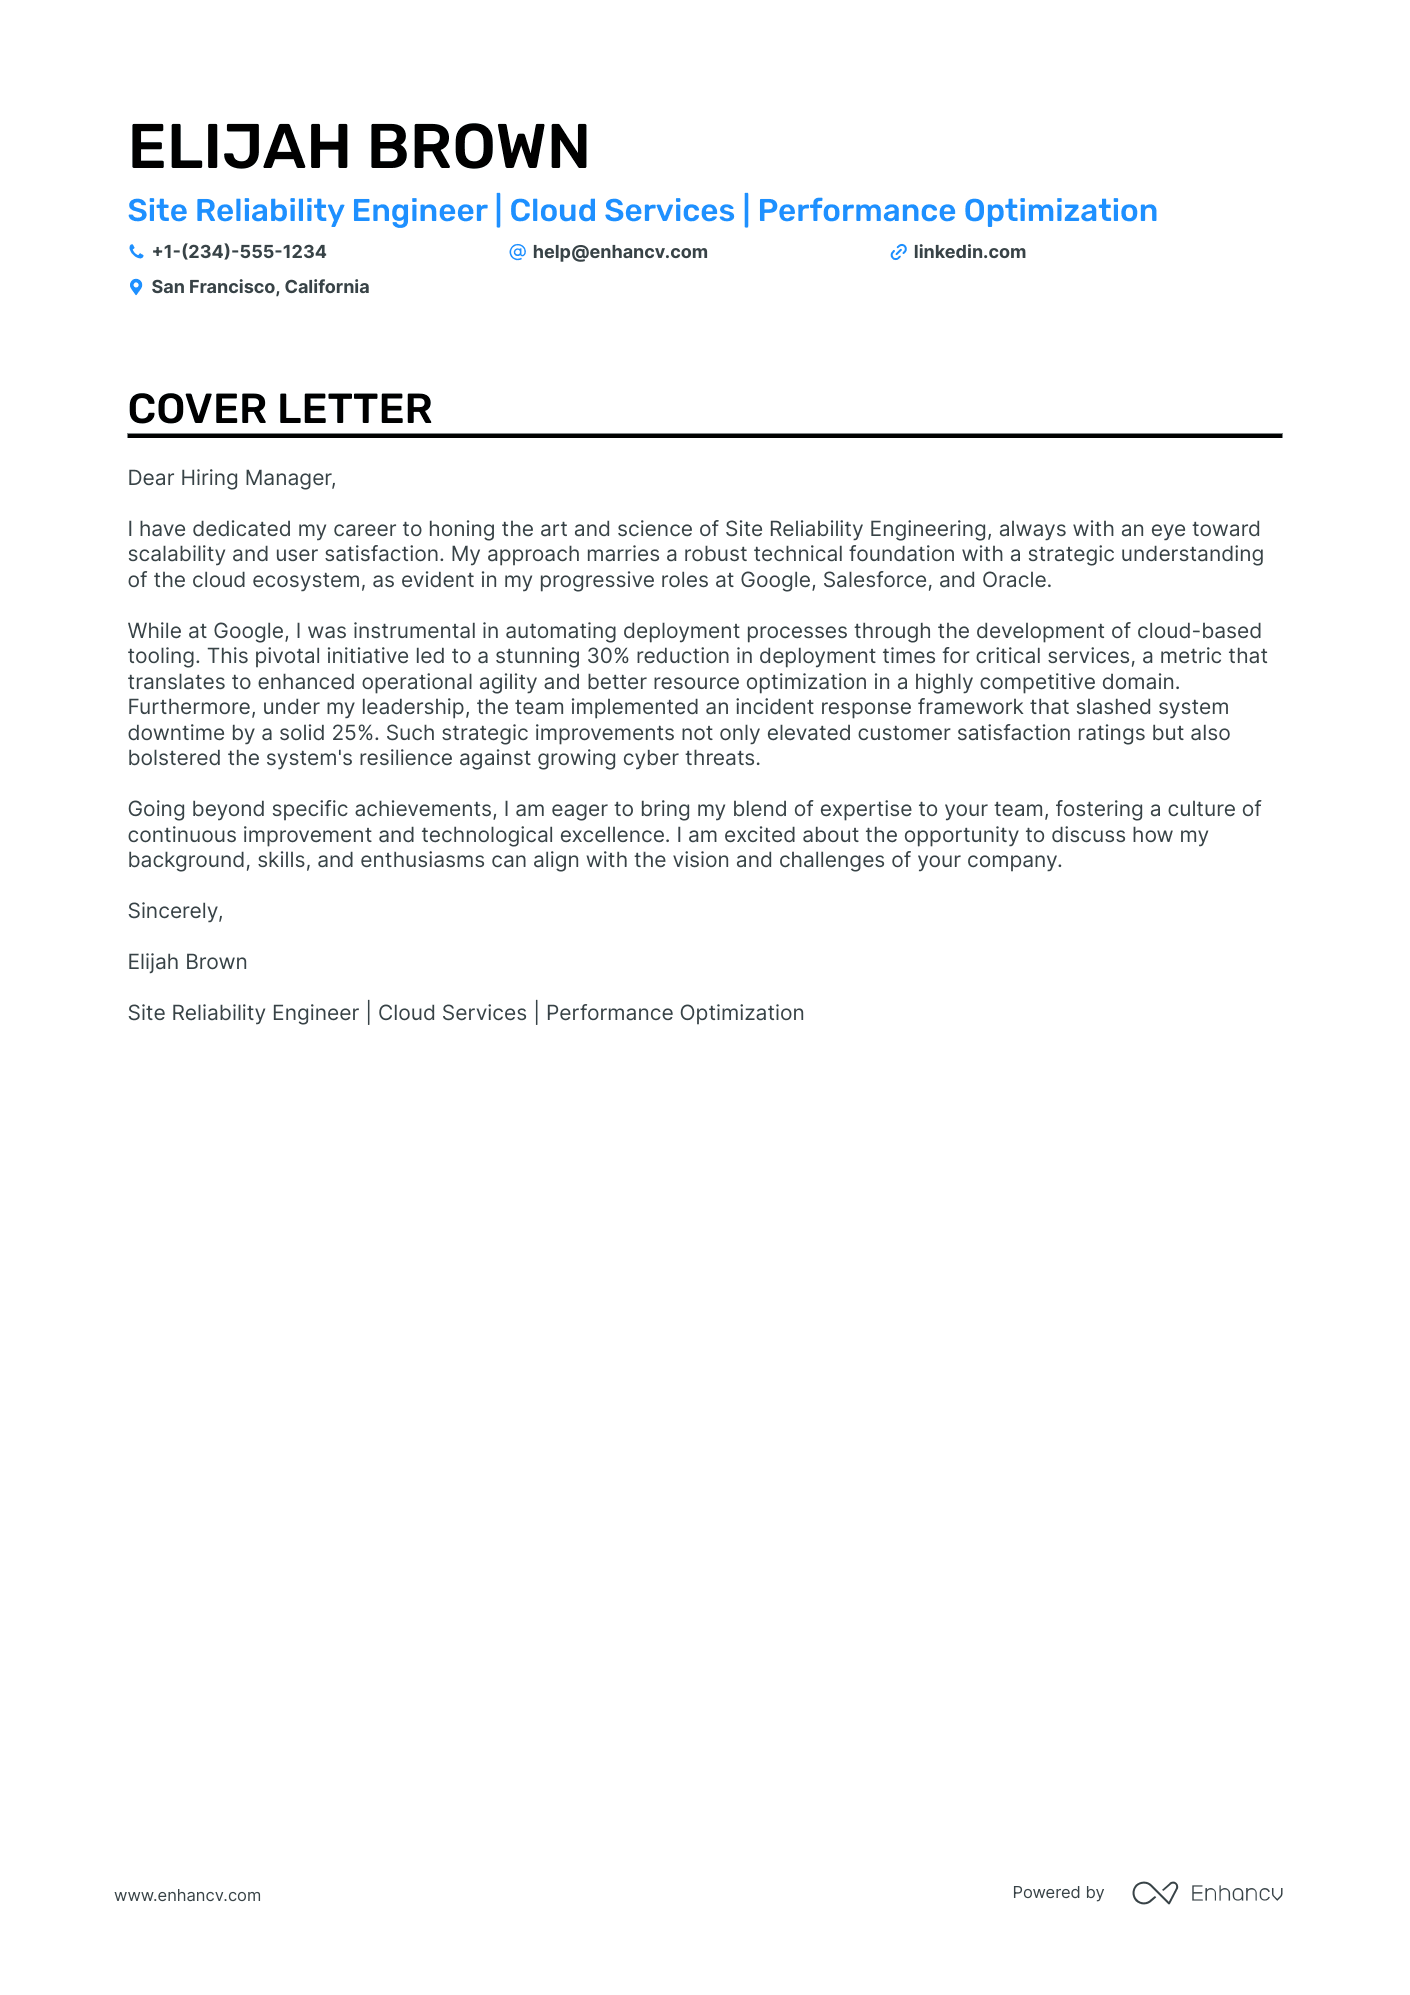 Site Reliability Engineer cover letter